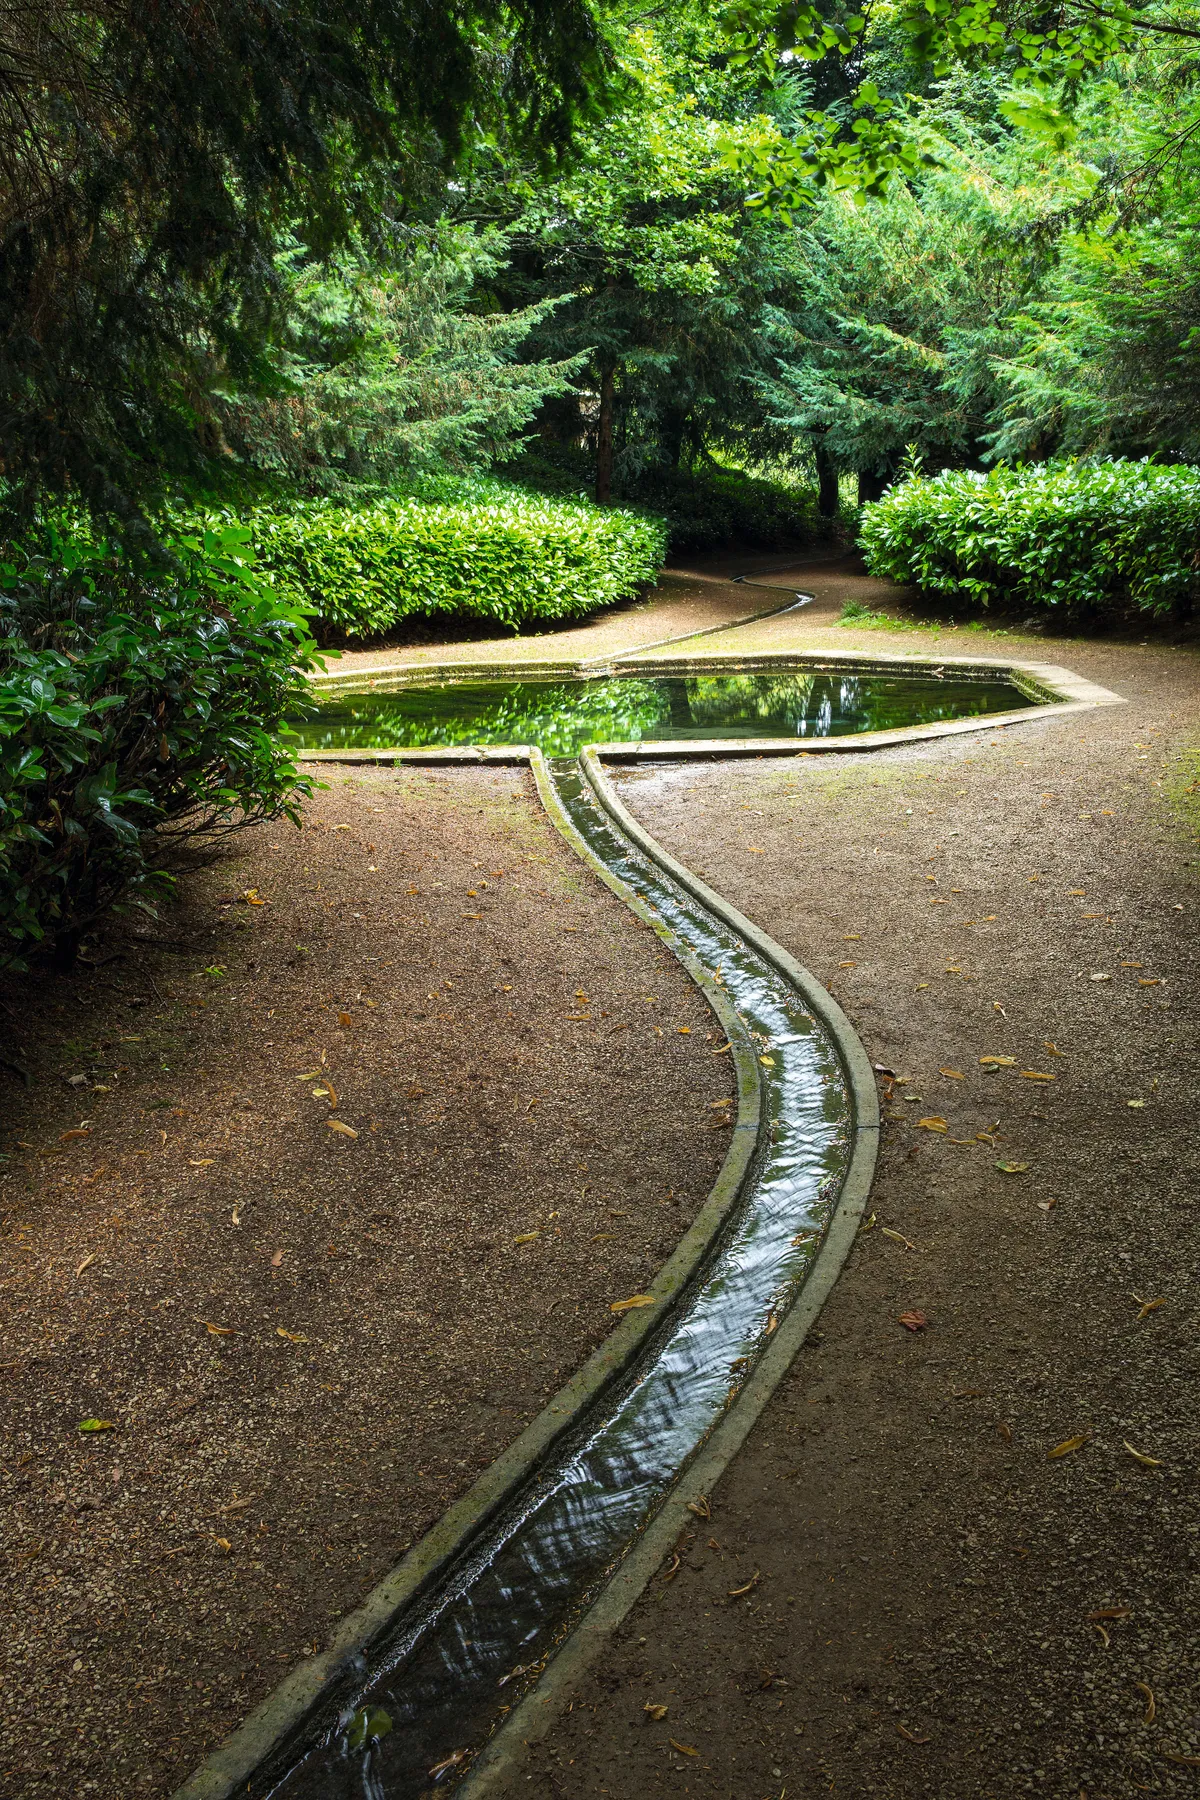 A paved area with a serpentine rill leads running water to a tranquil and still pond surrounded by greenery and trees